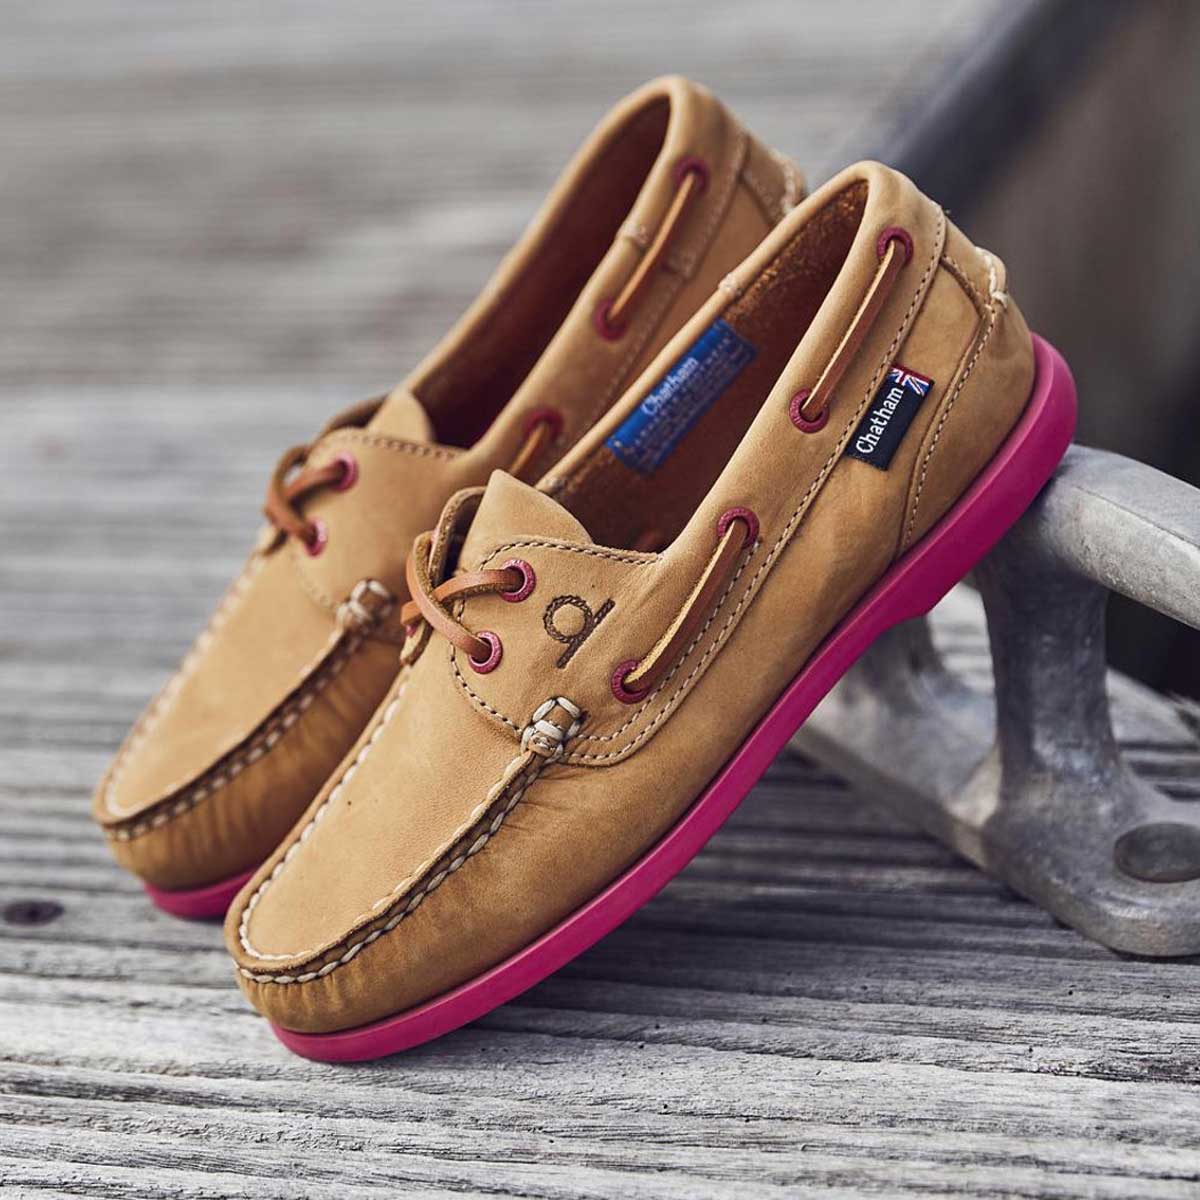 CHATHAM Ladies Pippa II G2 Leather Boat Shoes - Tan/Pink